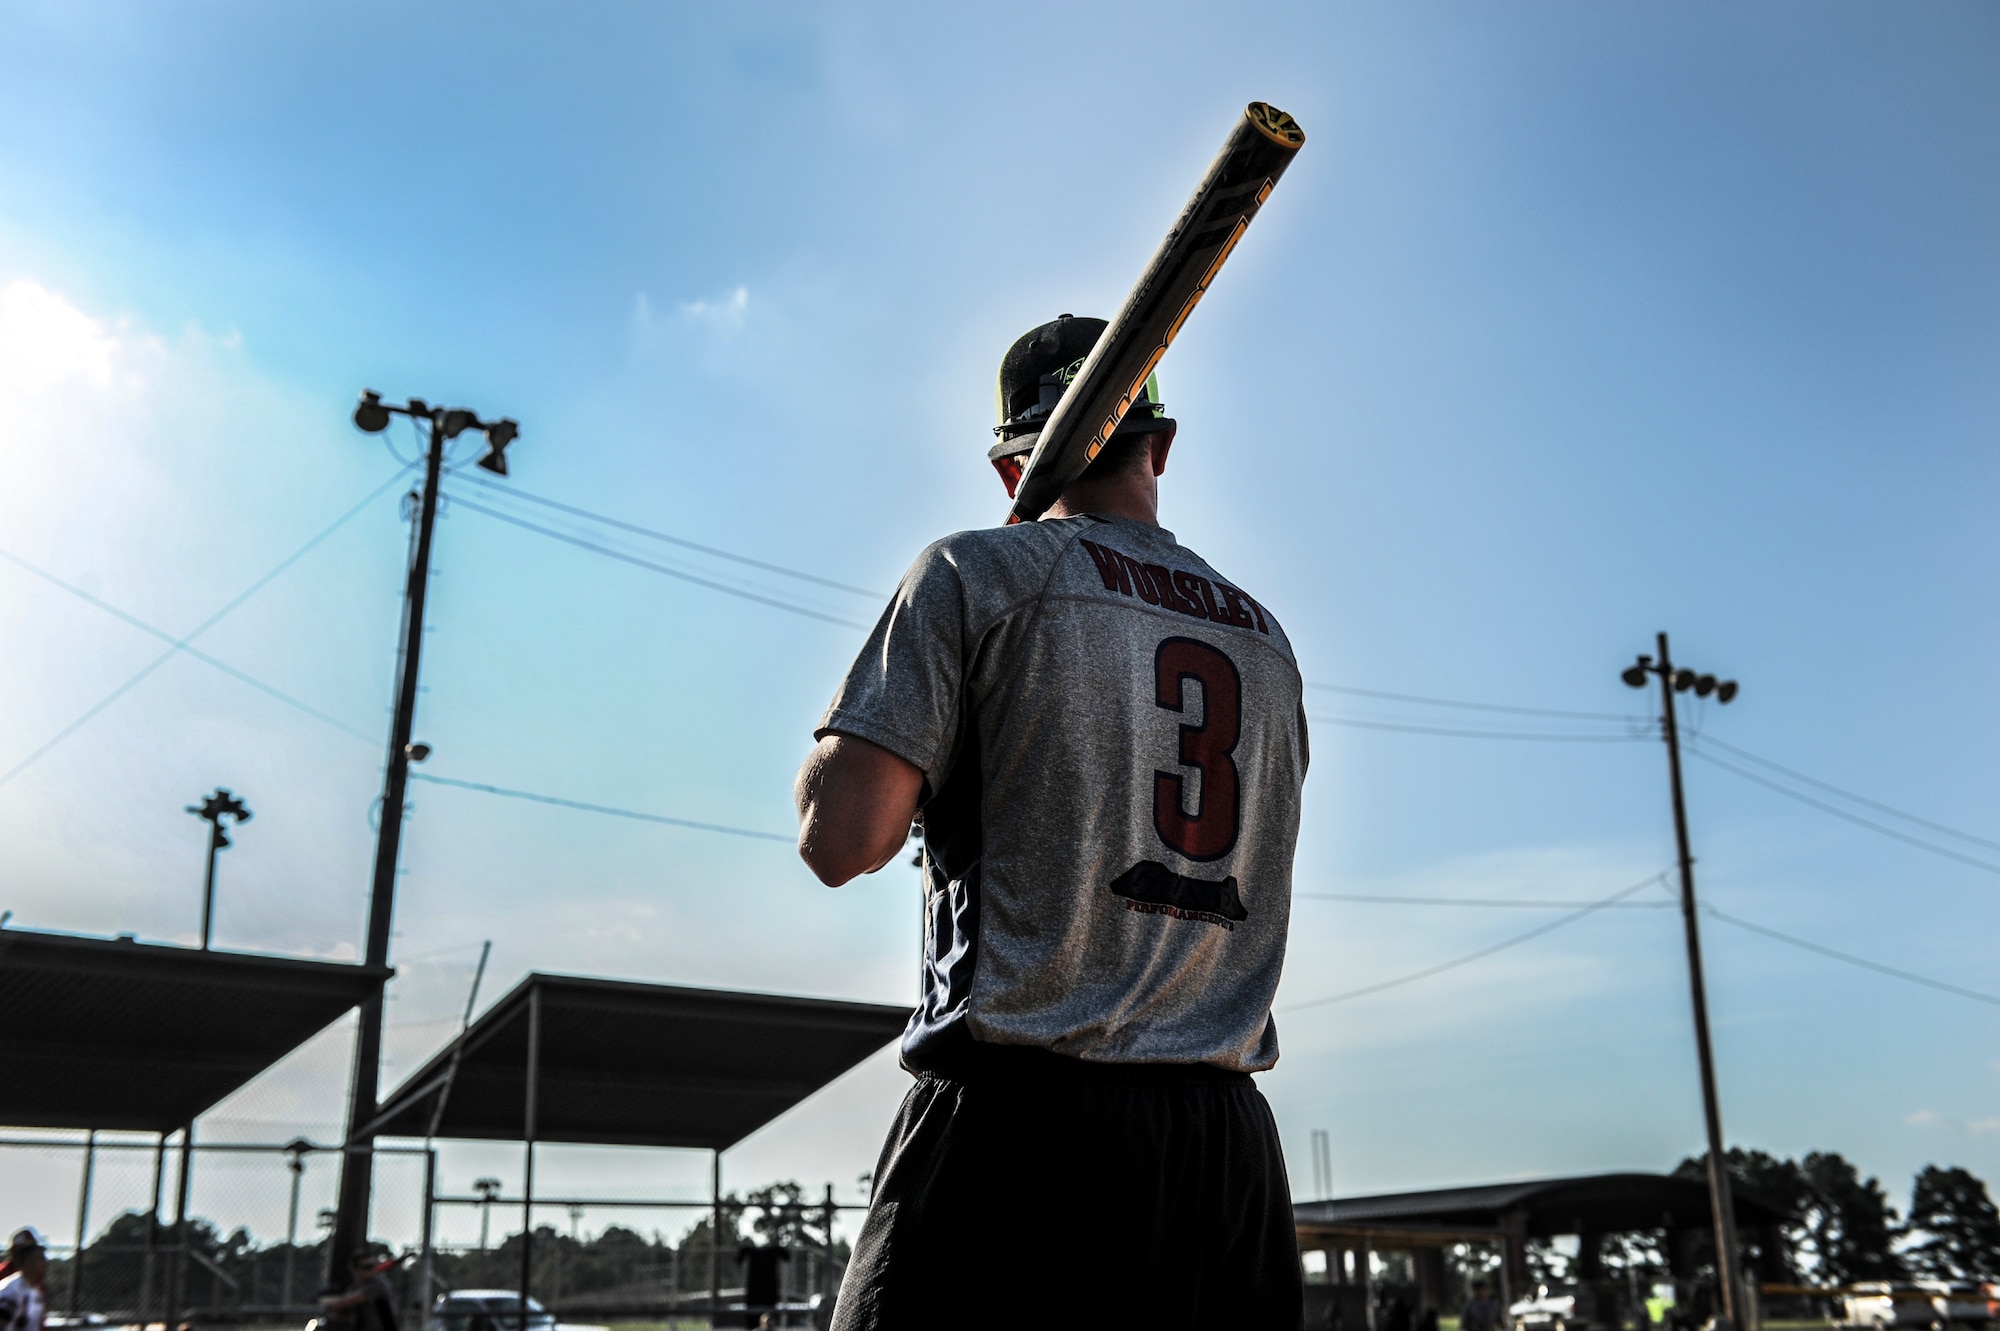 Airman 1st Class Troy Worsley, the 19th Logistics Readiness Squadron shortstop, warms up before his turn at bat during the intramural softball championship game Aug. 27, 2014 at Little Rock Air Force Base, Ark. The 19th LRS defeated the 19th Aircraft Maintenance Squadron 18-5. (U.S. Air Force photo by Airman 1st Class Cliffton Dolezal)